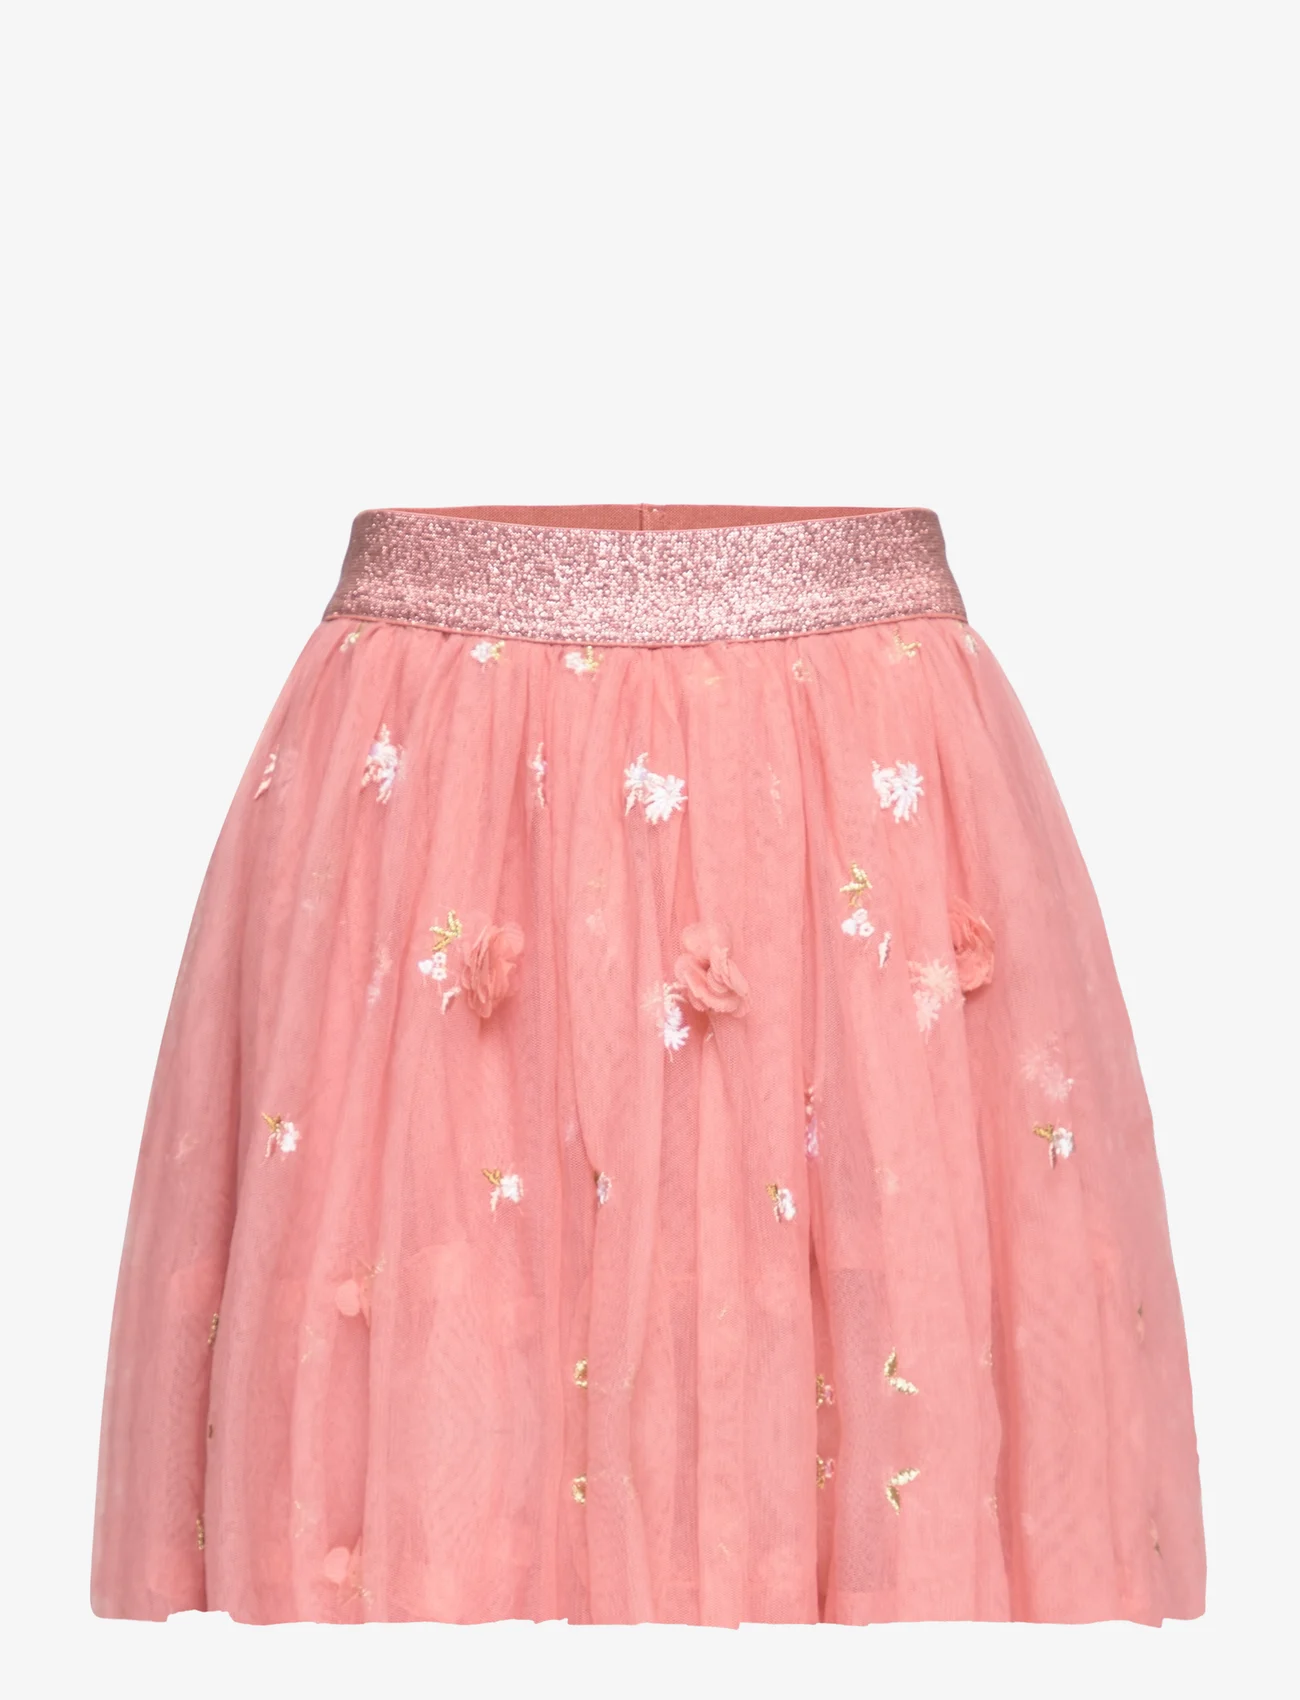 Hust & Claire - Ninna - Skirt - tulle skirts - ash rose - 0